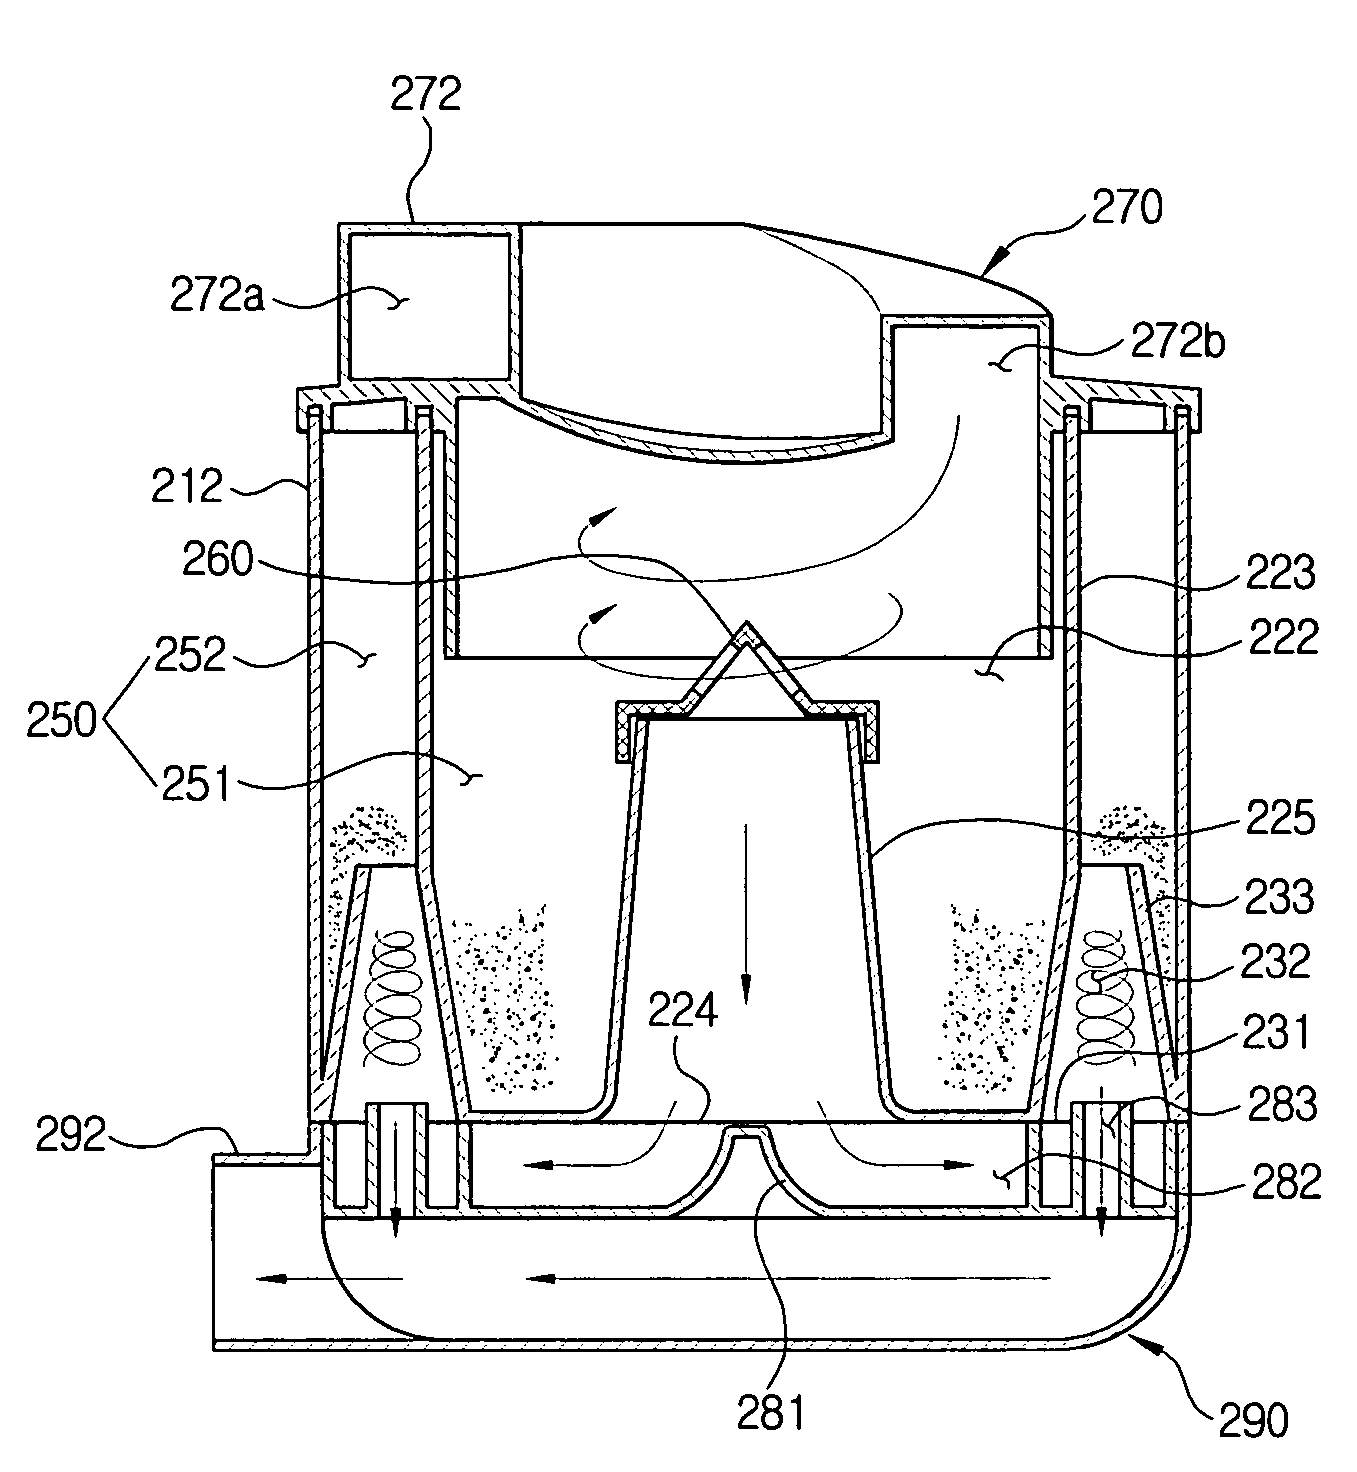 Cyclone dust collection apparatus